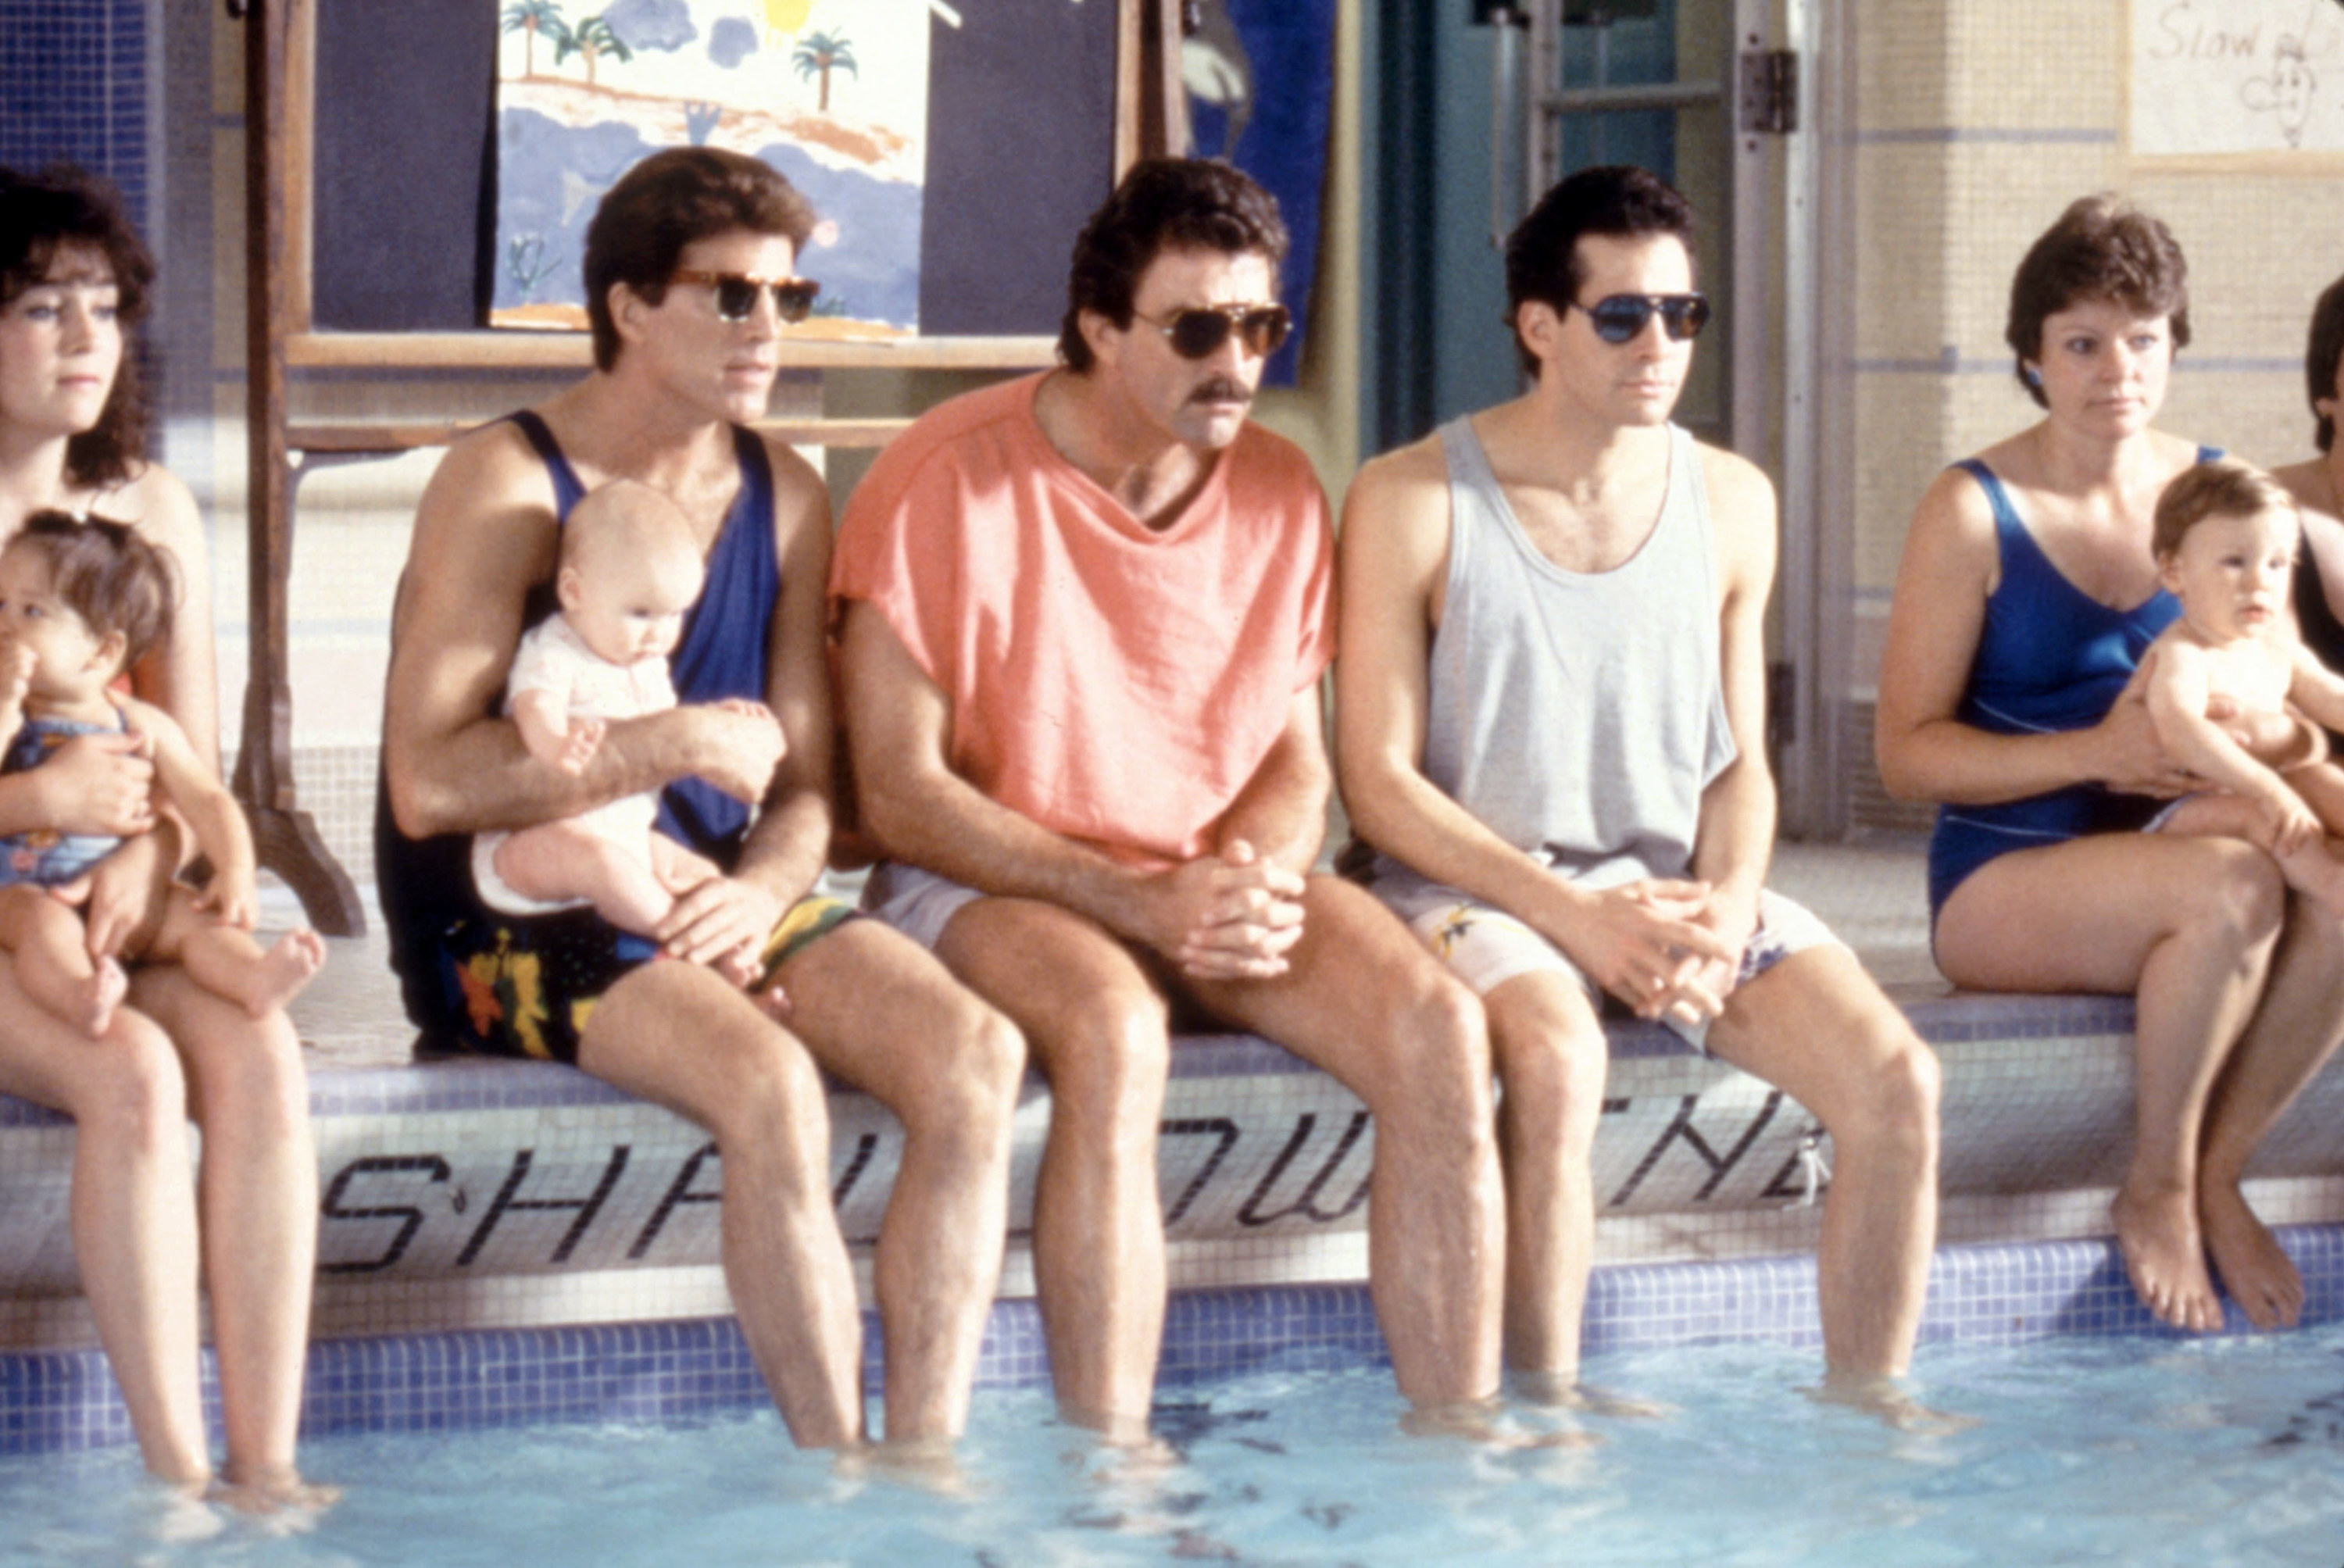 Ted Danson, Tom Selleck, and Steve Guttenberg sit together on the edge of a pool